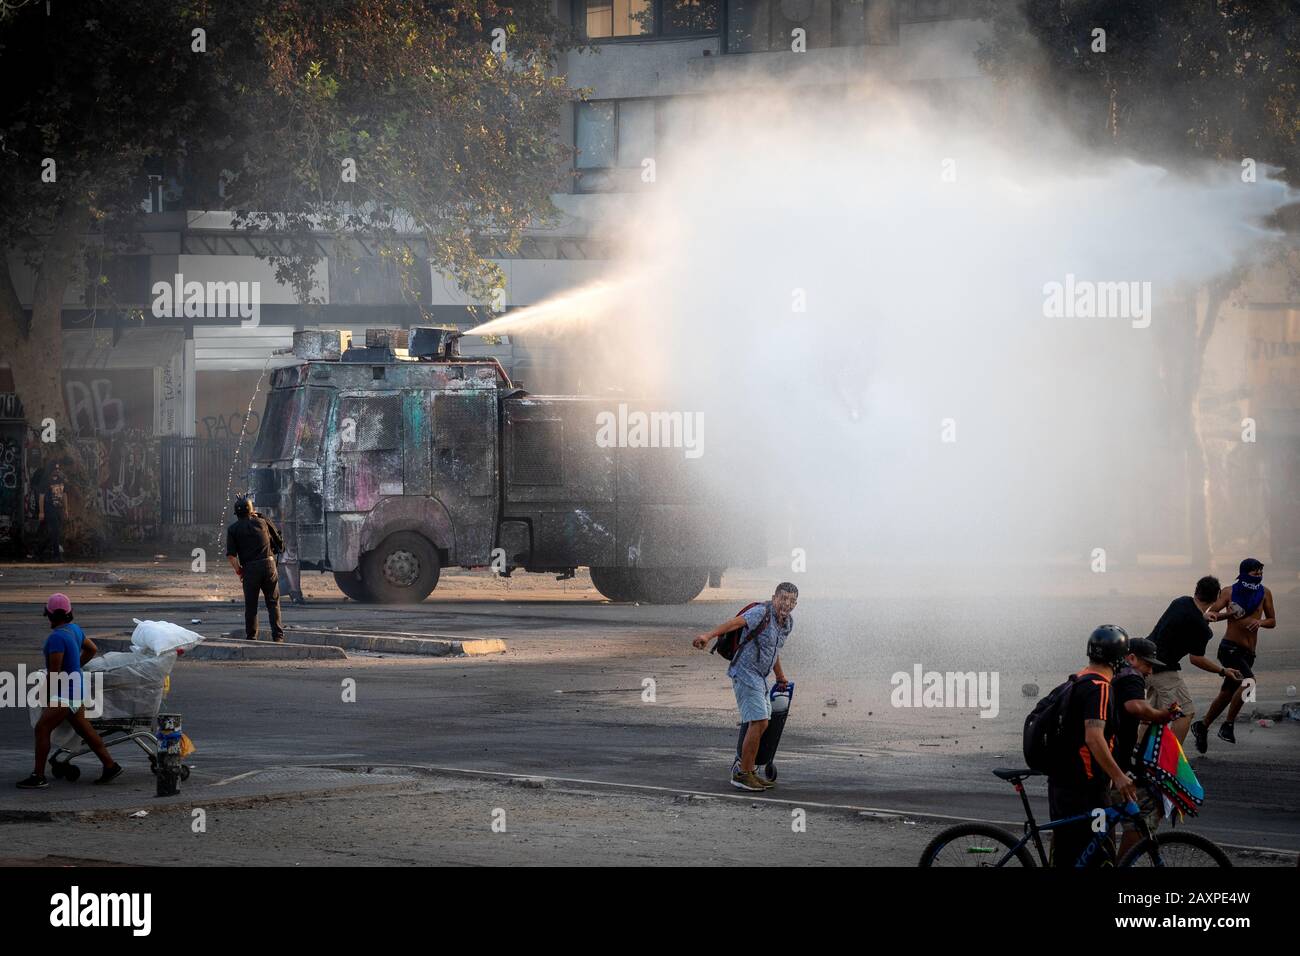 Armoured police truck with water cannon spraying water on protesters during recent demonstrations at Plaza de Italia in Santiago de Chile. Stock Photo